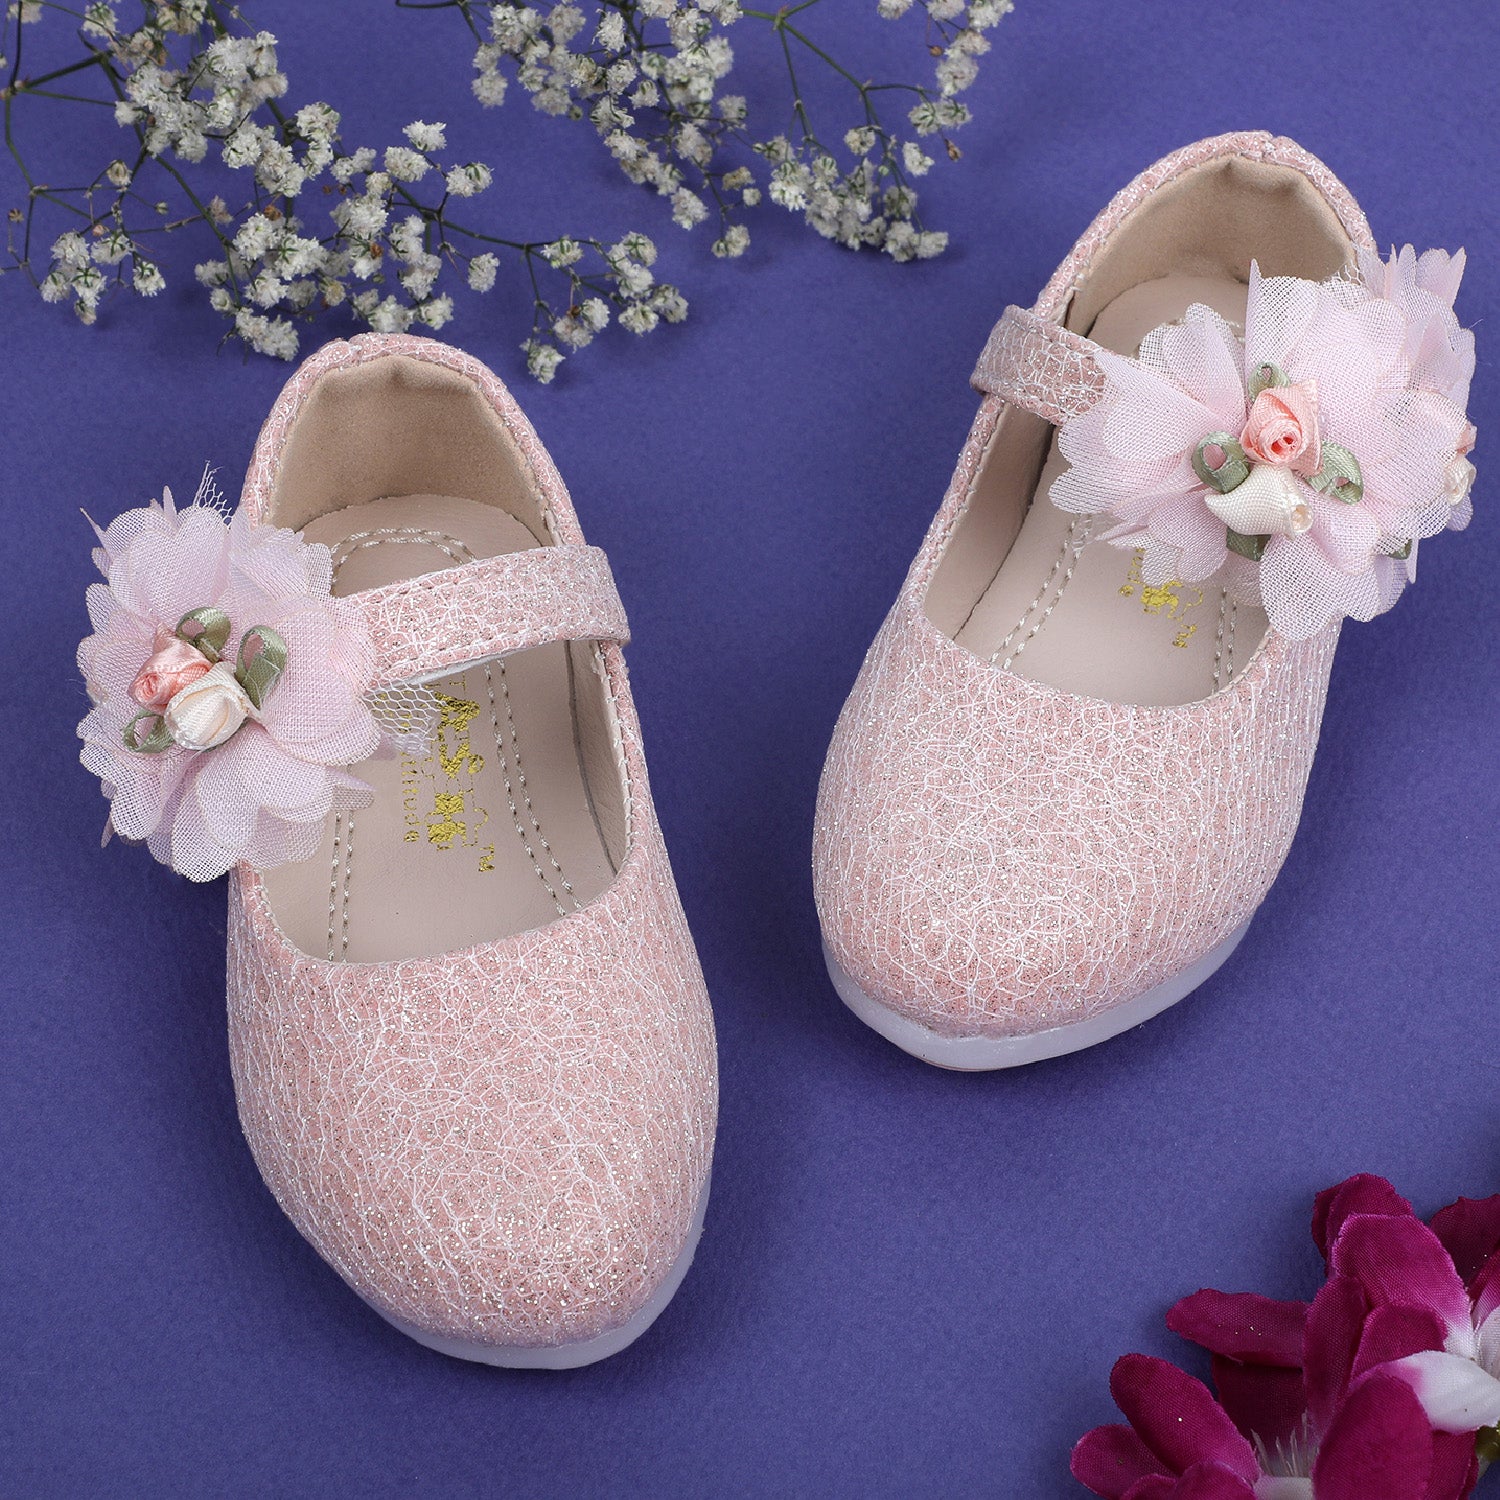 Baby Moo x Bash Kids Floral Shimmer Mary Jane Ballerinas - Pink